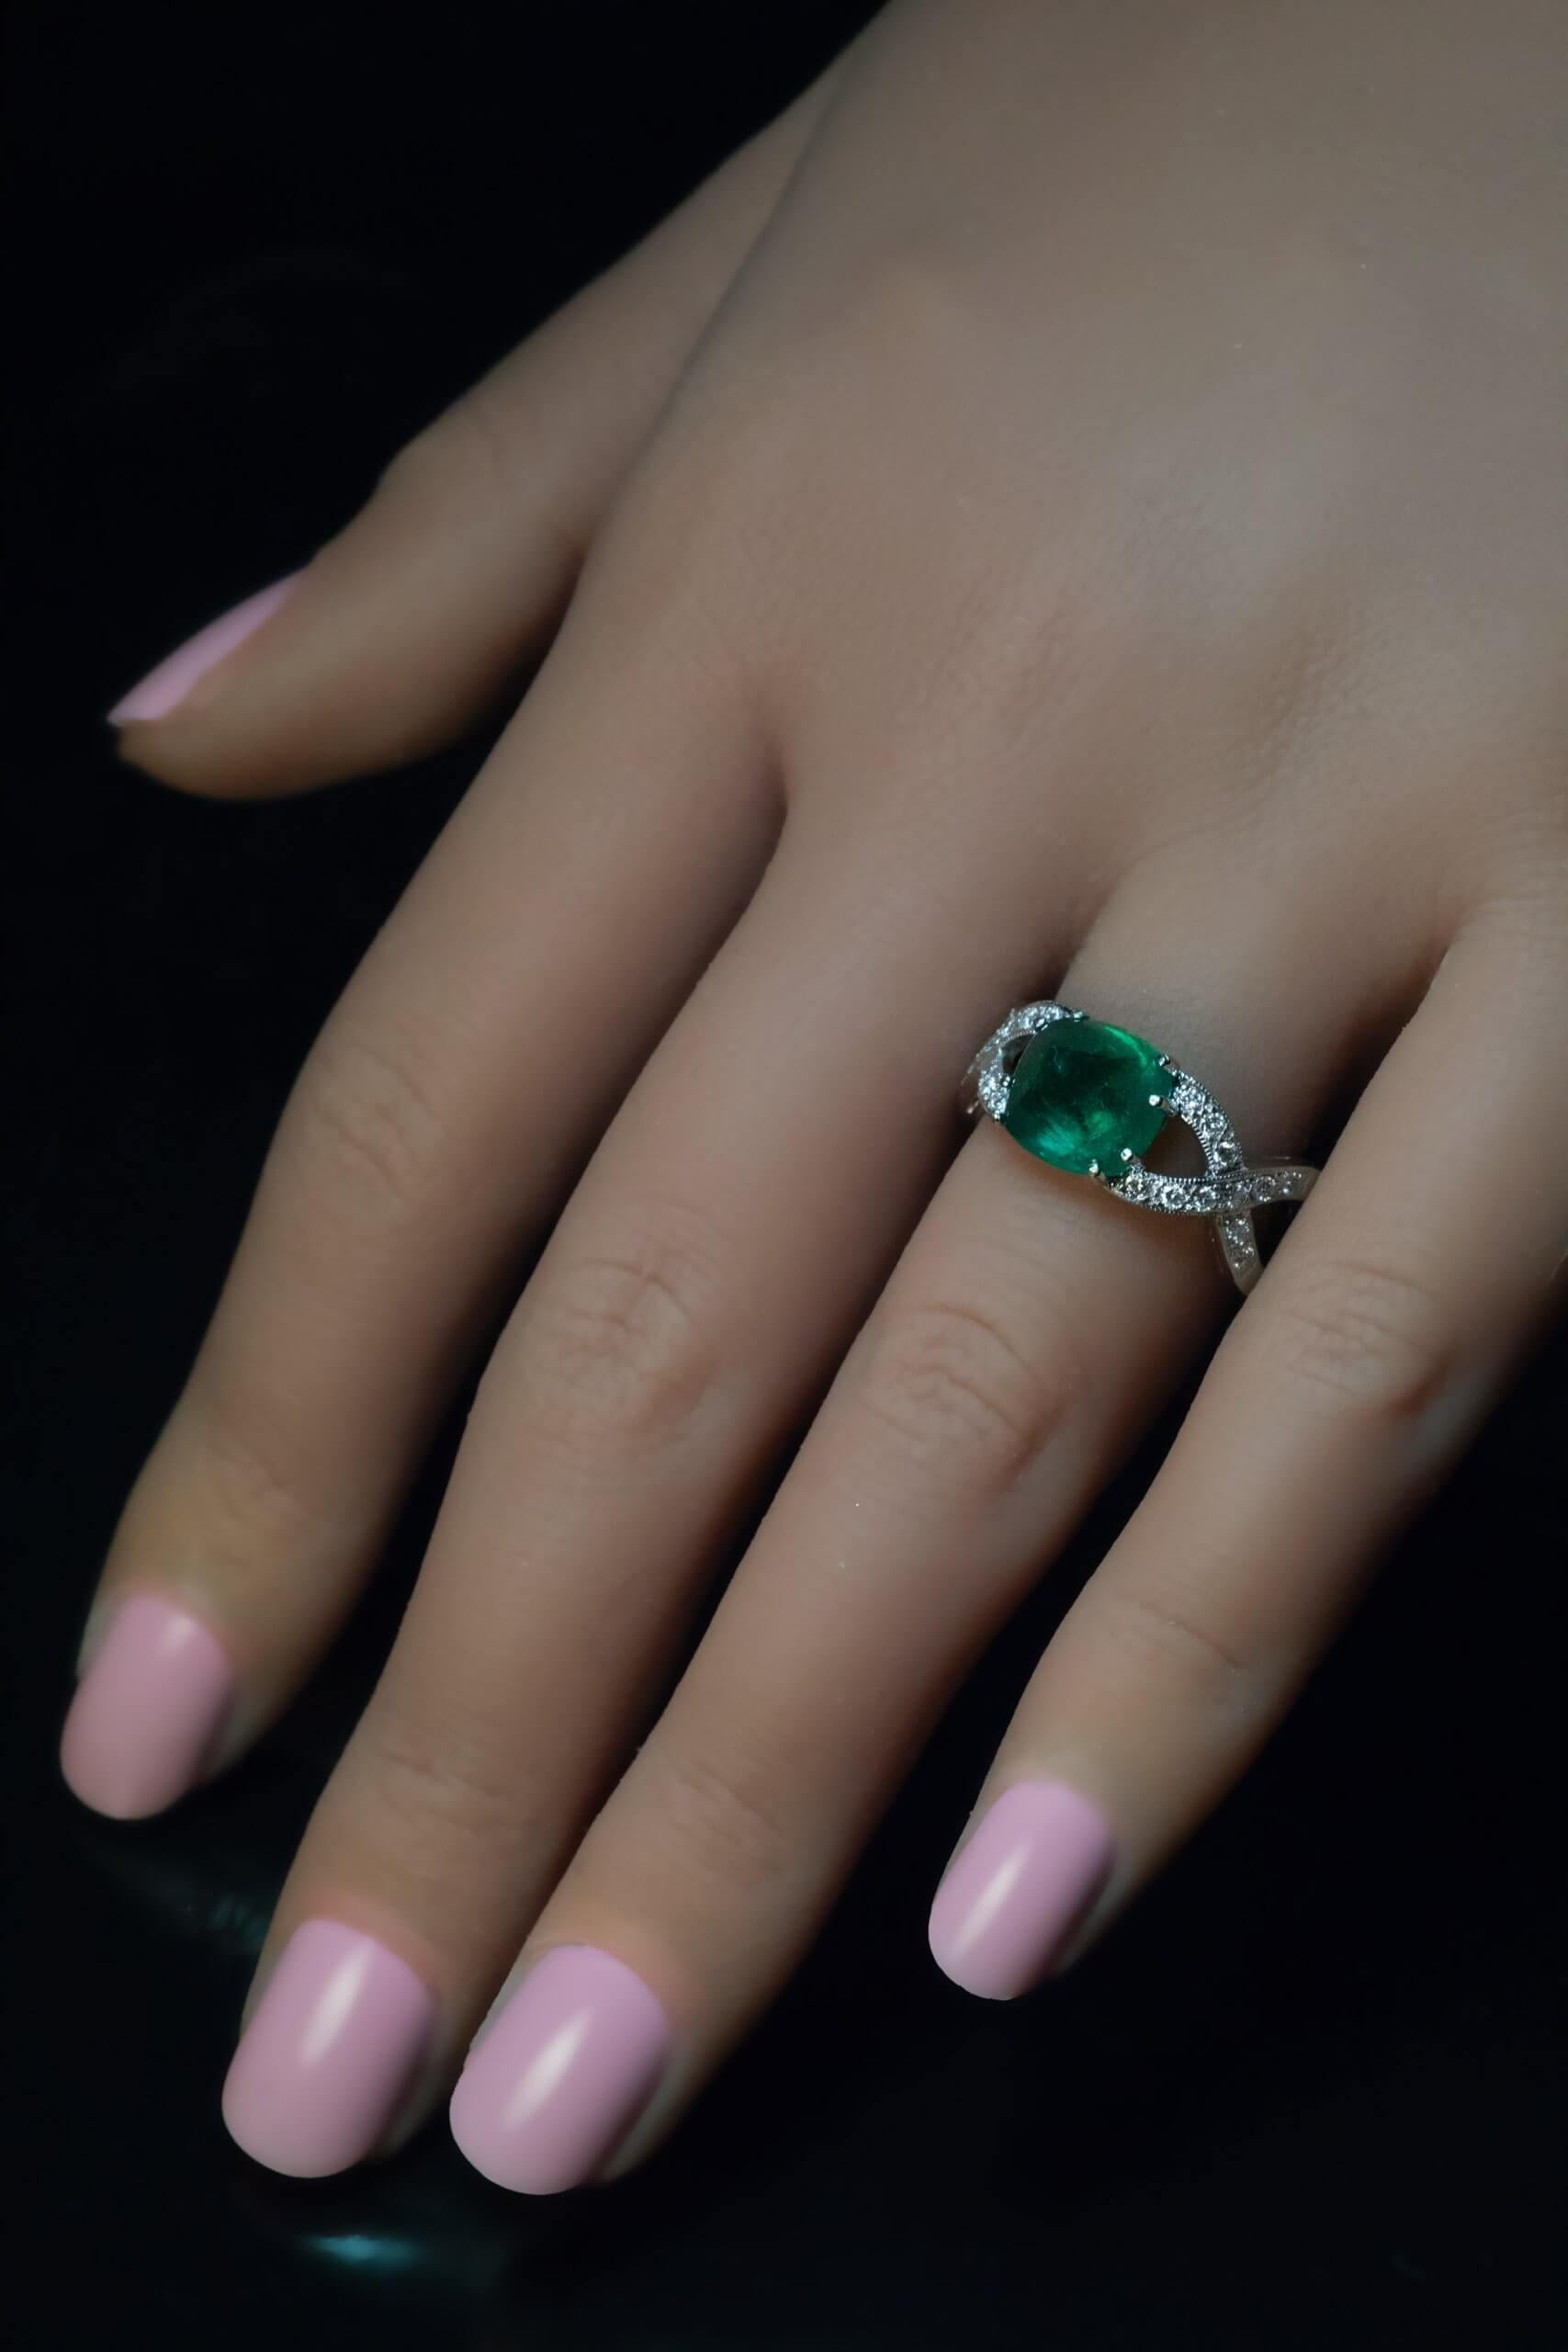 This contemporary 18K white gold ring features a 3.45 ct sugarloaf cabochon cut Zambian emerald of a very fine blueish green color. The emerald is flanked by eternity motif shoulders set with diamonds.  Total emerald weight is 3.45 carats. 